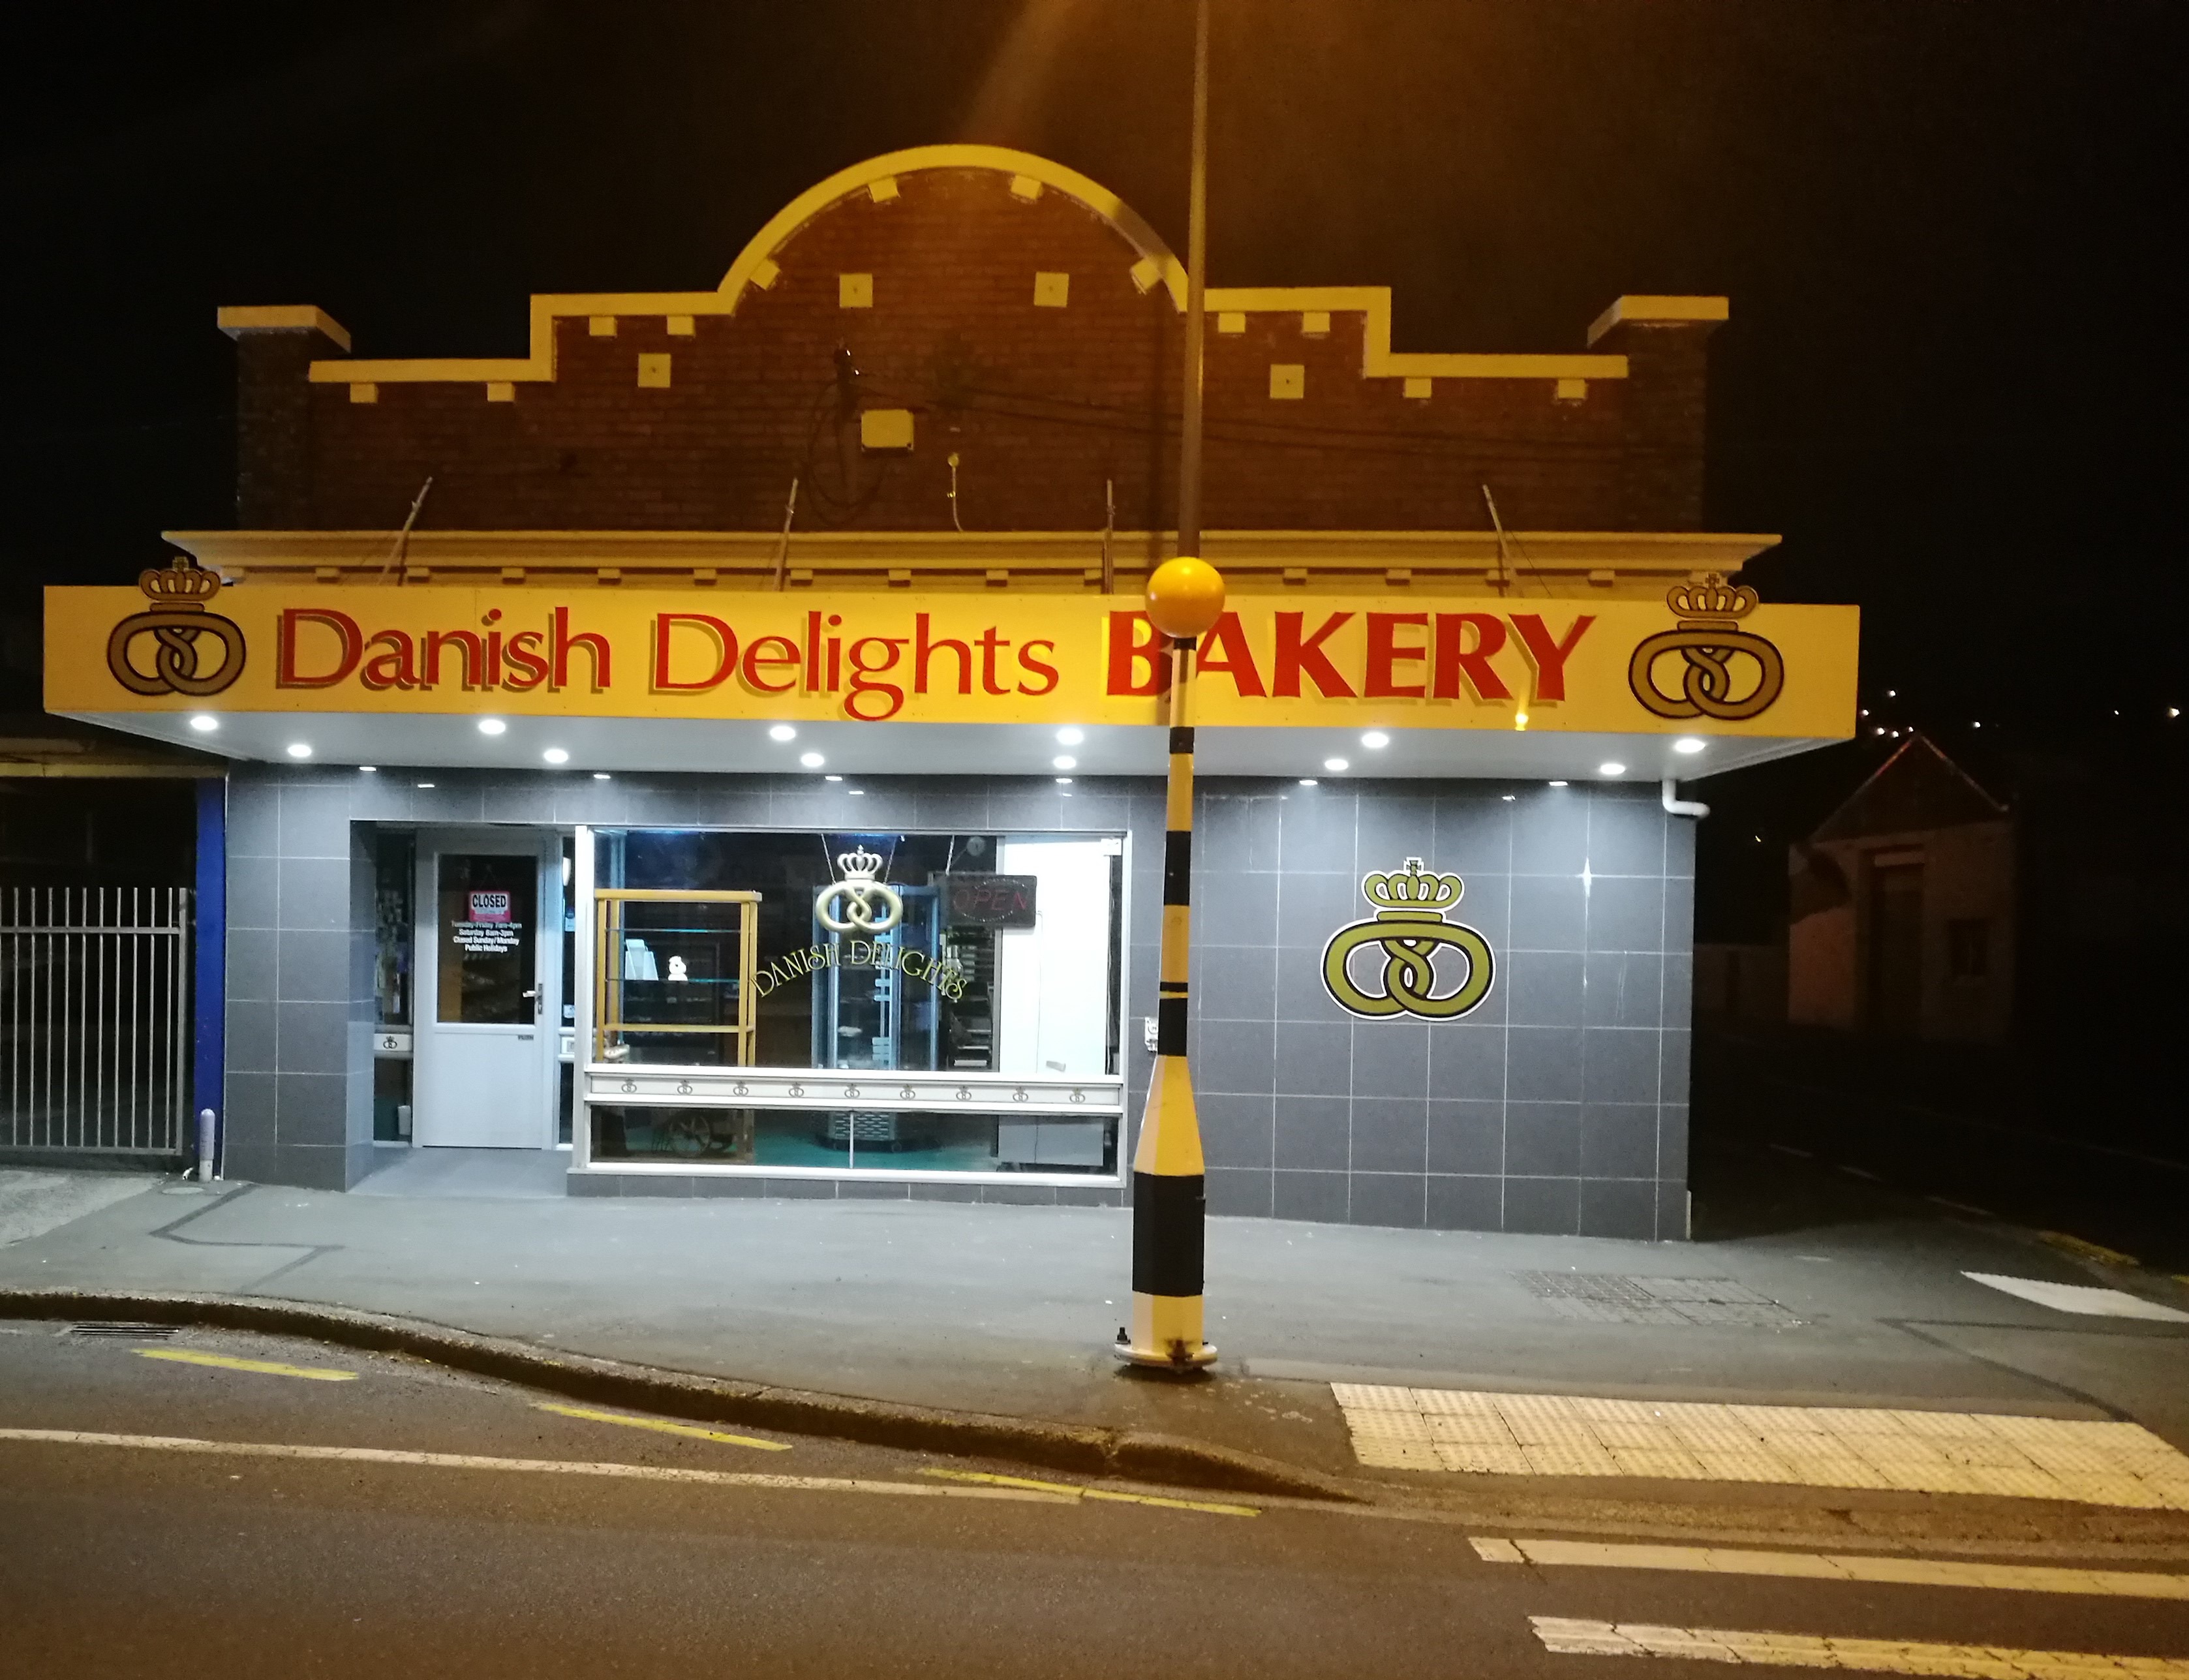 The bakery at night time